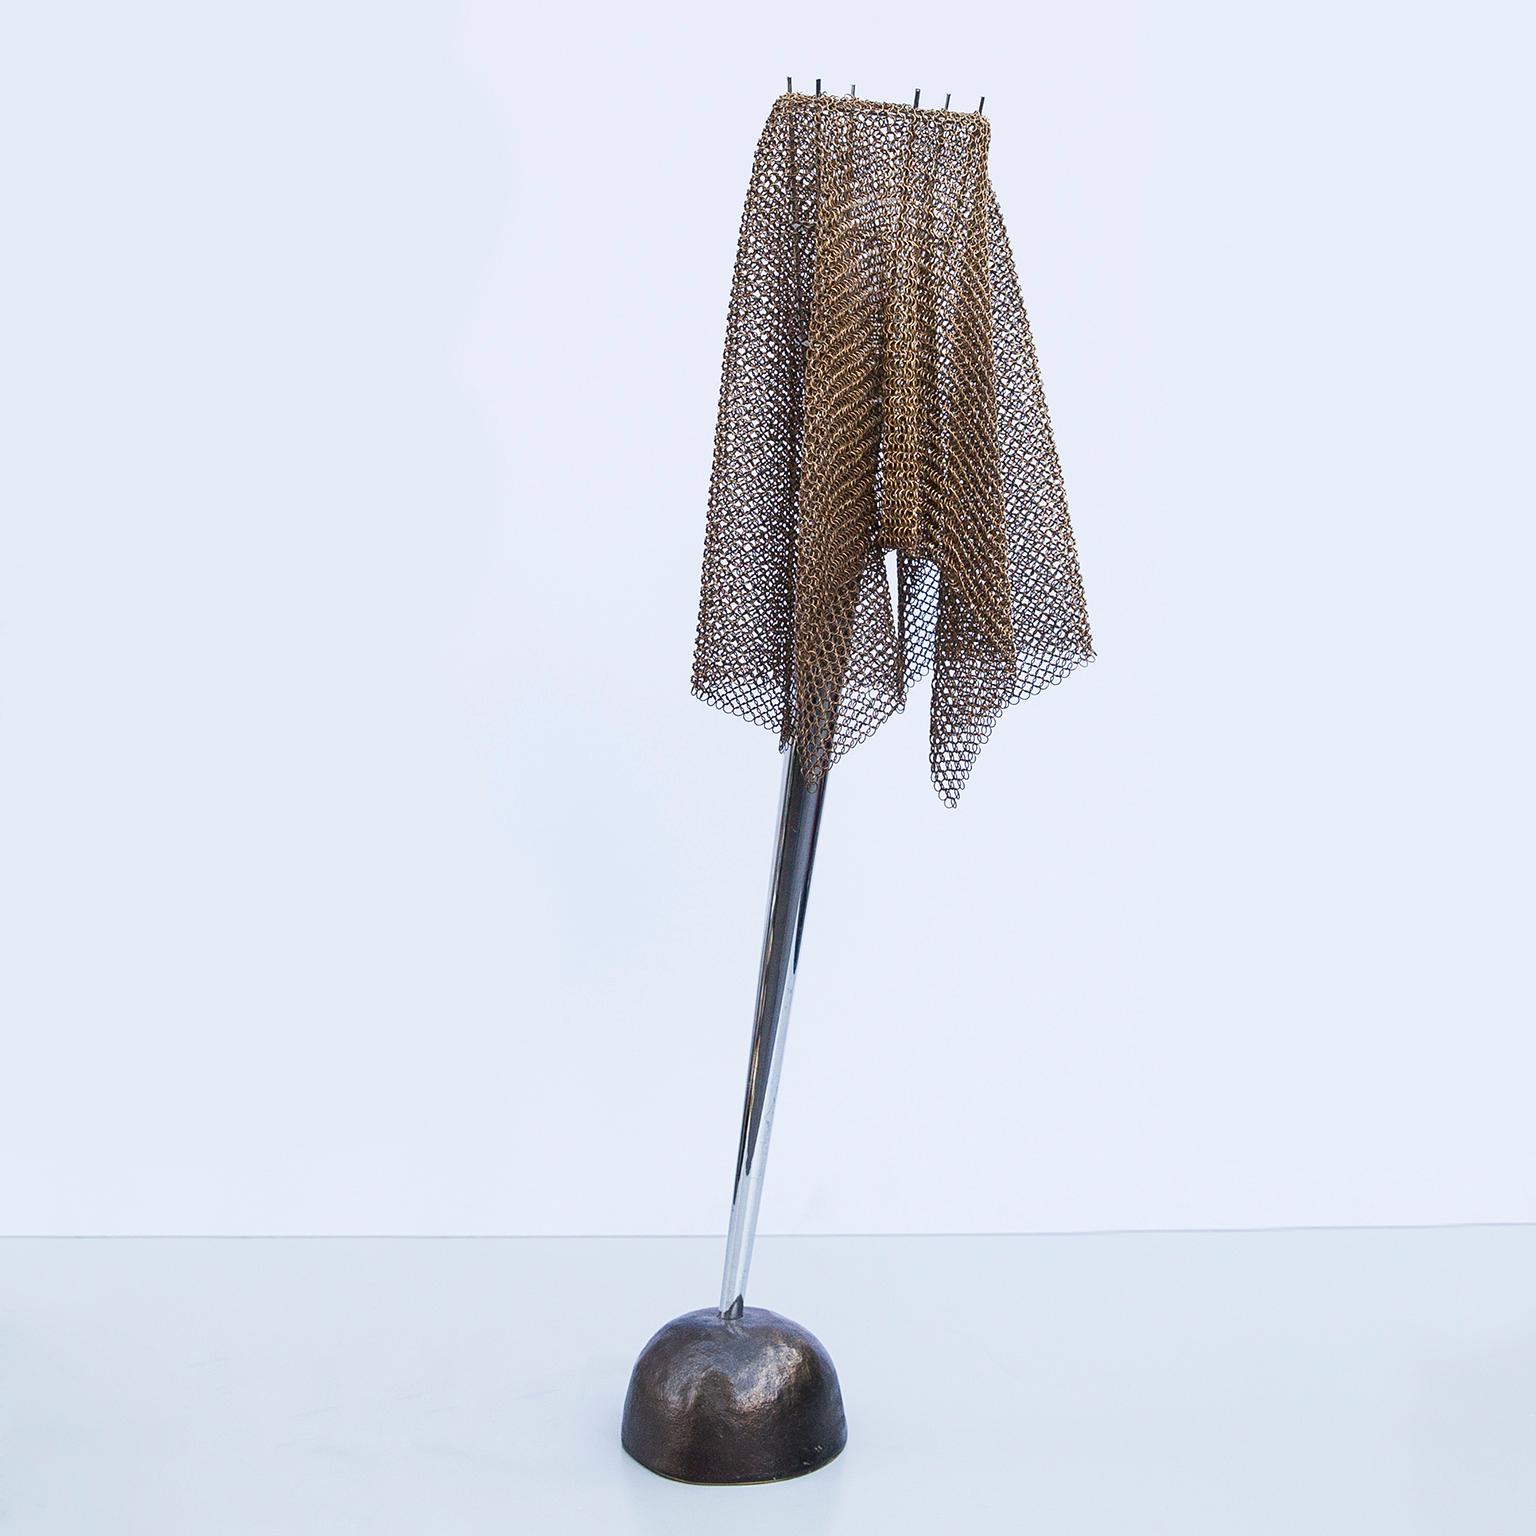 Italian Chain Mail Table Lamp “Ecate” by Toni Cordero for Artemide, 1990